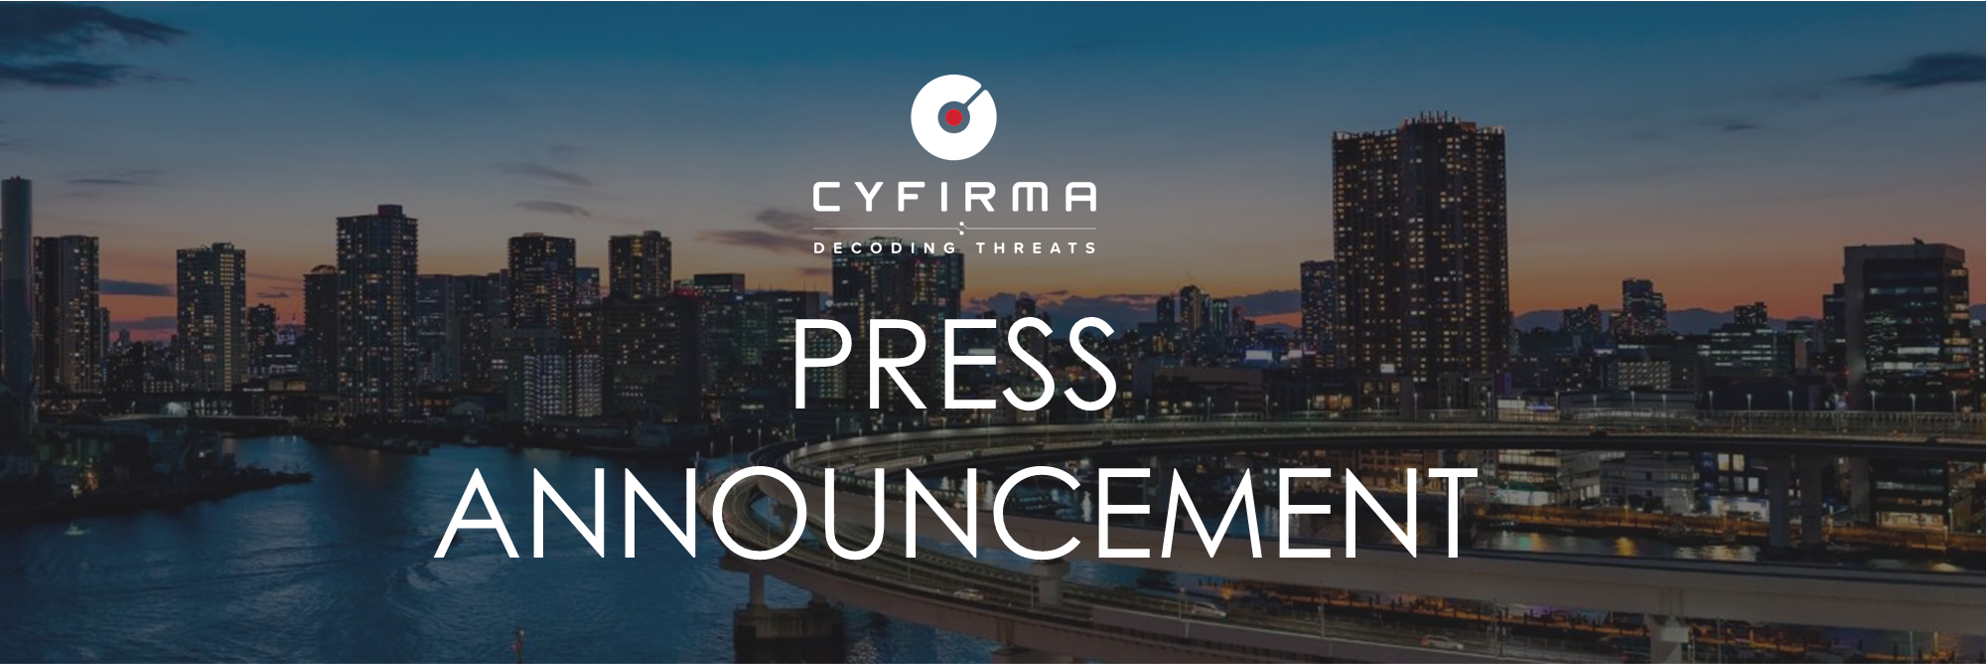 CYFIRMA Expands Mitsubishi Motors’ Visibility On External Threat Landscape and Strengthens Its Cybersecurity Posture